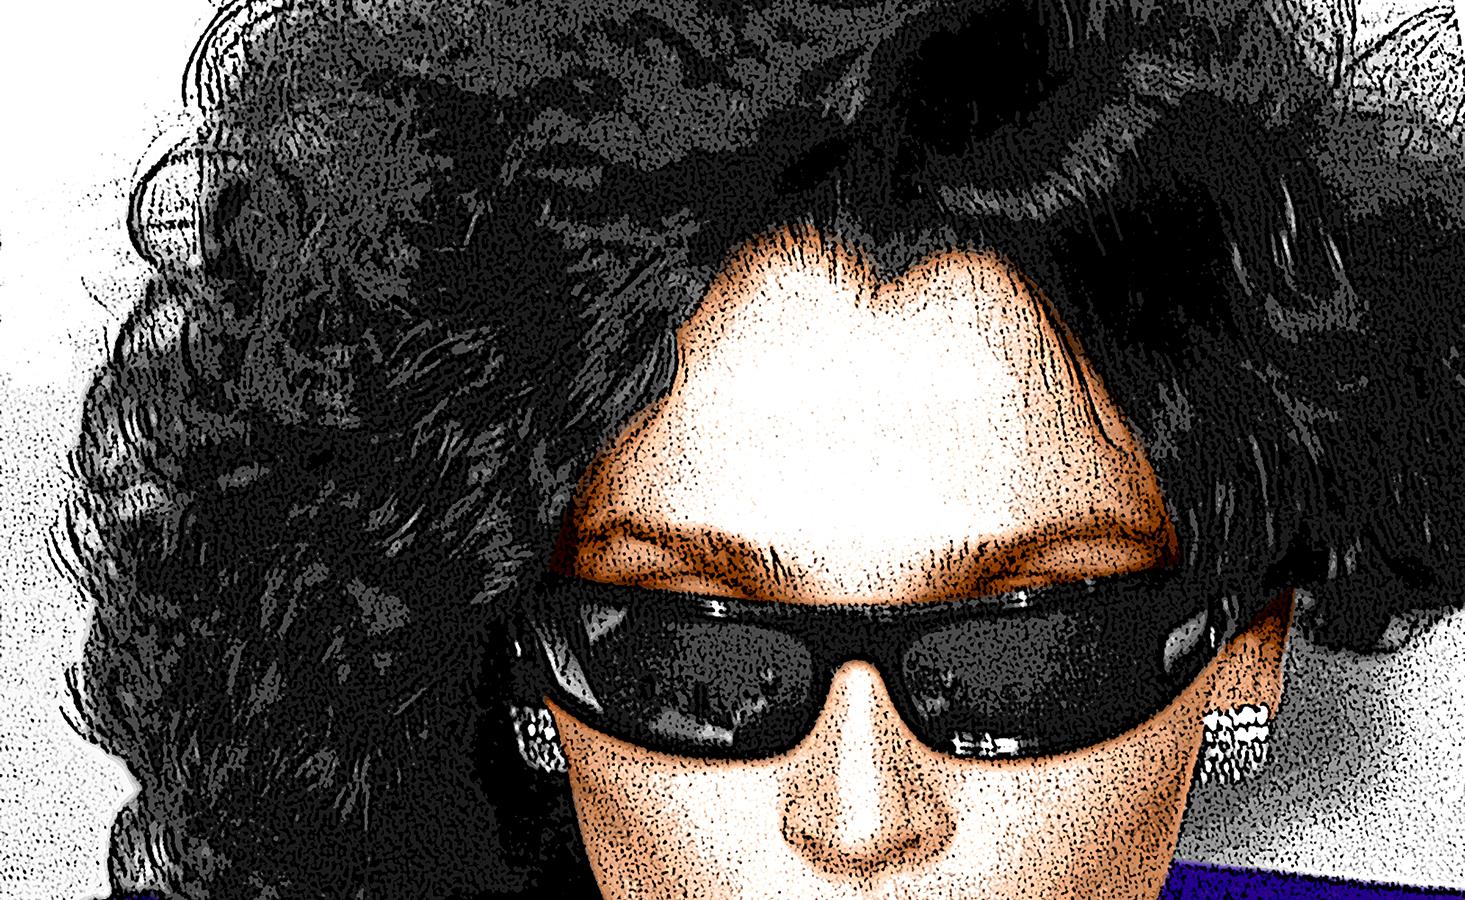 Sunglasses and Diamonds, Stylized and colorized Fashion photograph - Photograph by Ceravolo